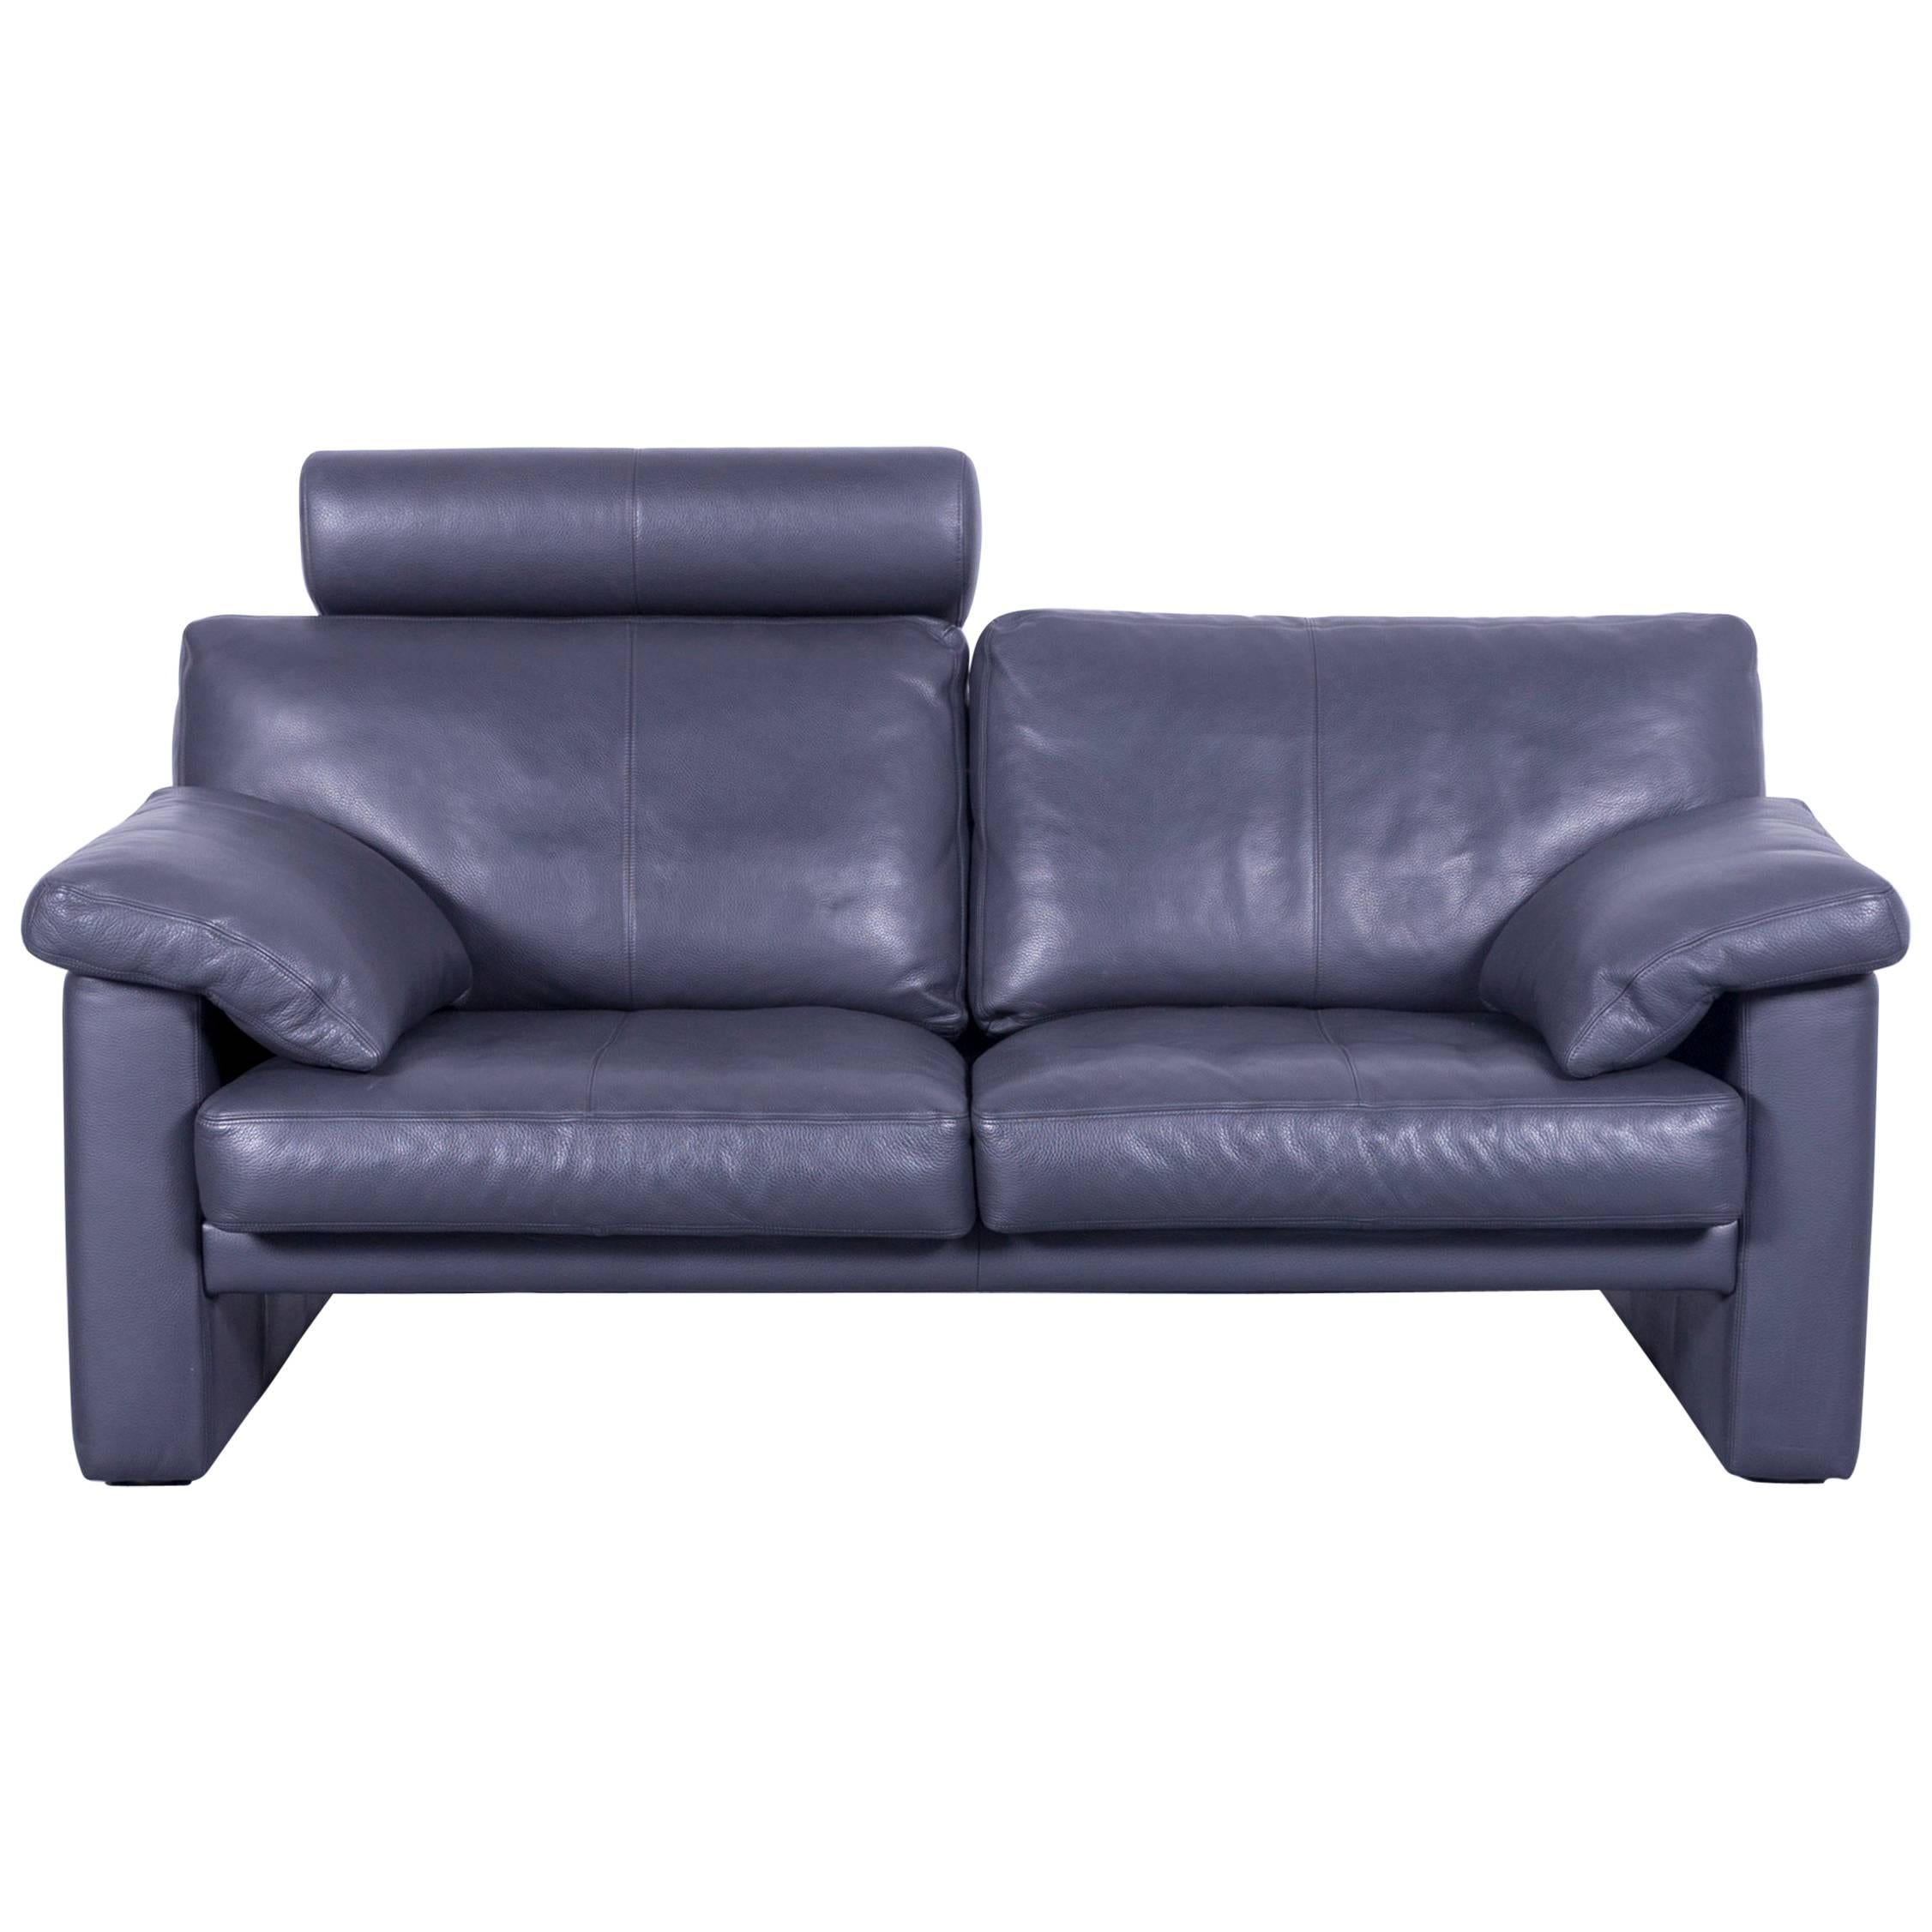 Erpo CL 300 Leather Sofa Grey Two-Seat Couch For Sale